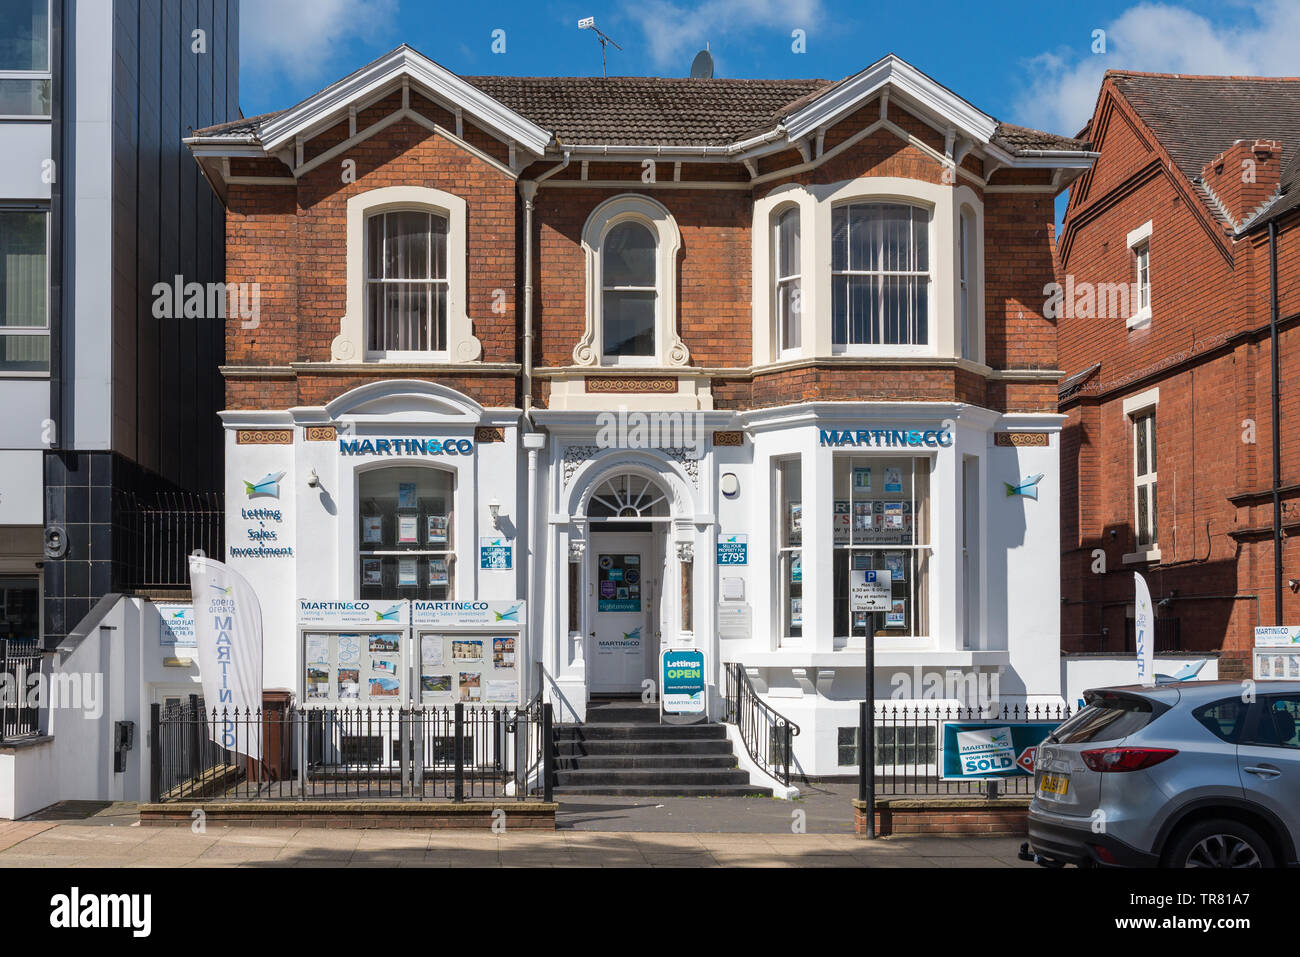 Martin & Co estate agents and letting agents office in a Victorian building on Waterloo Road, Wolverhampton, UK Stock Photo